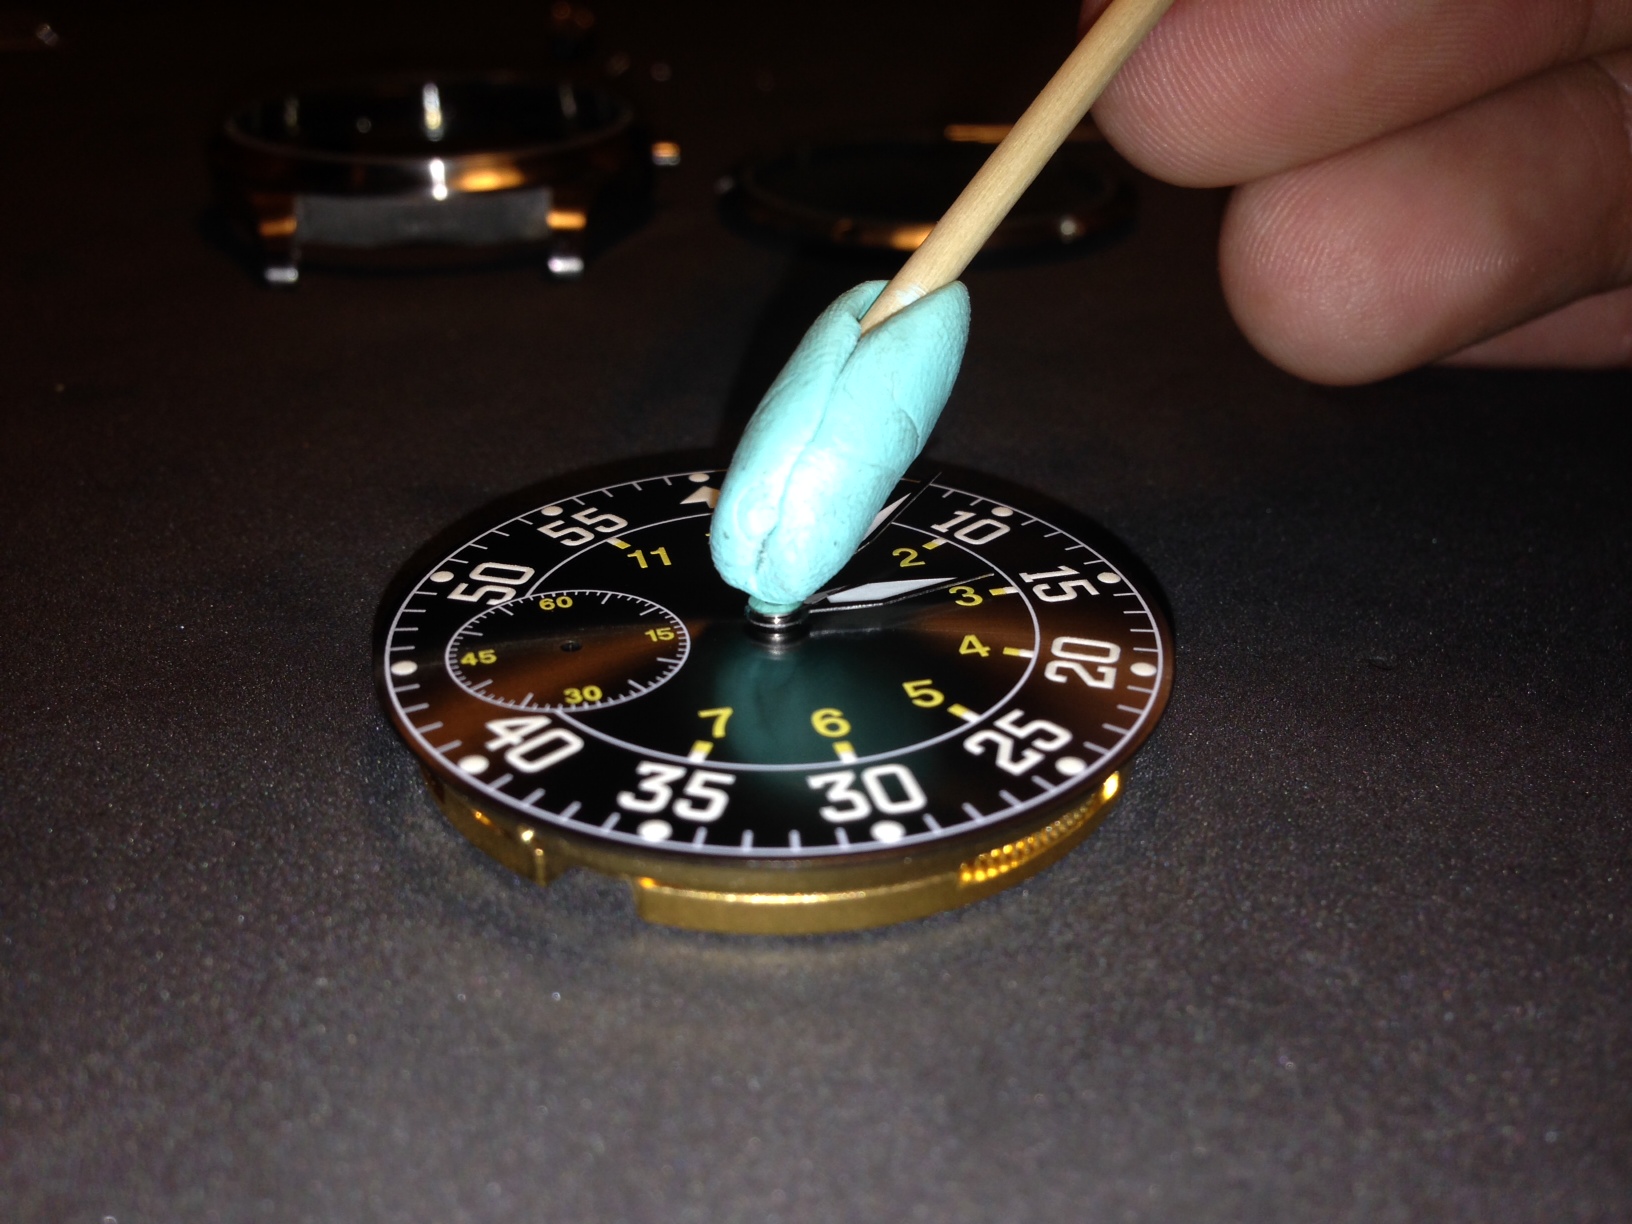 How to build your own mechanical watch - attach the minute hand